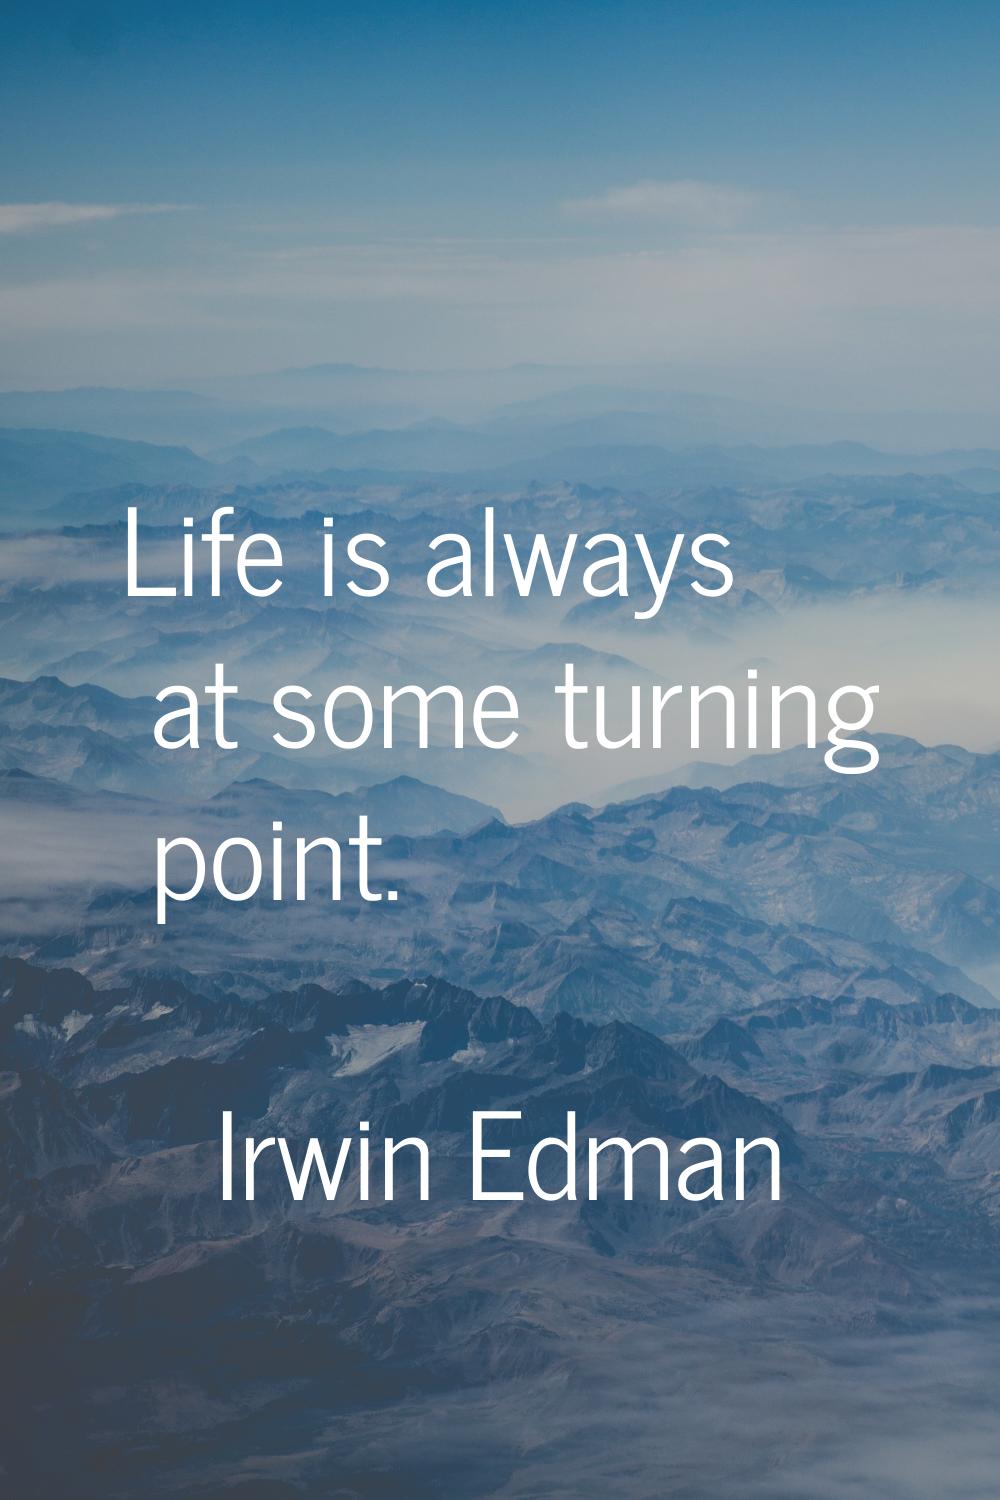 Life is always at some turning point.